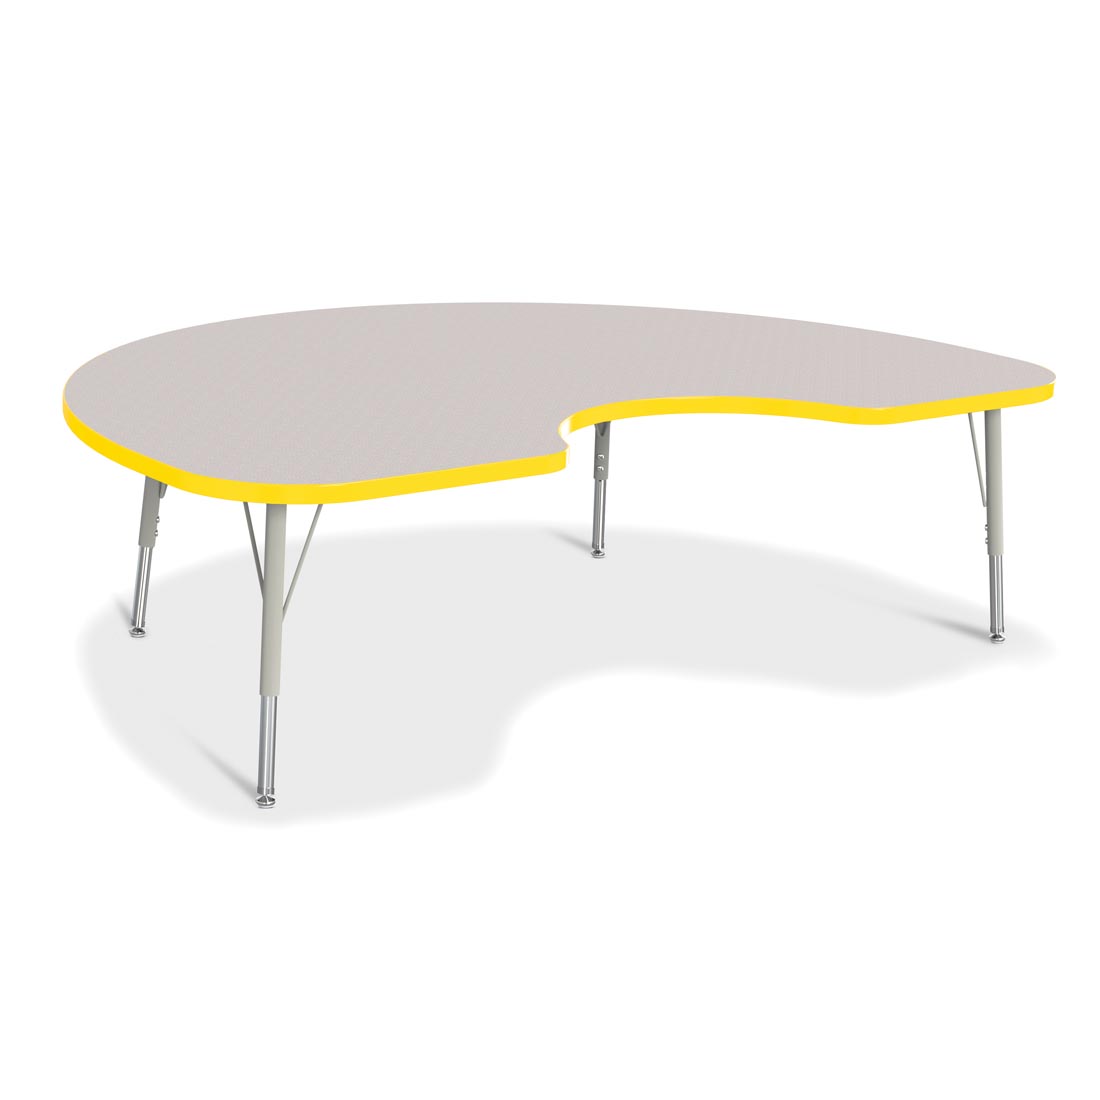 Berries Kidney Activity Table Elementary Height Gray With Yellow Edge